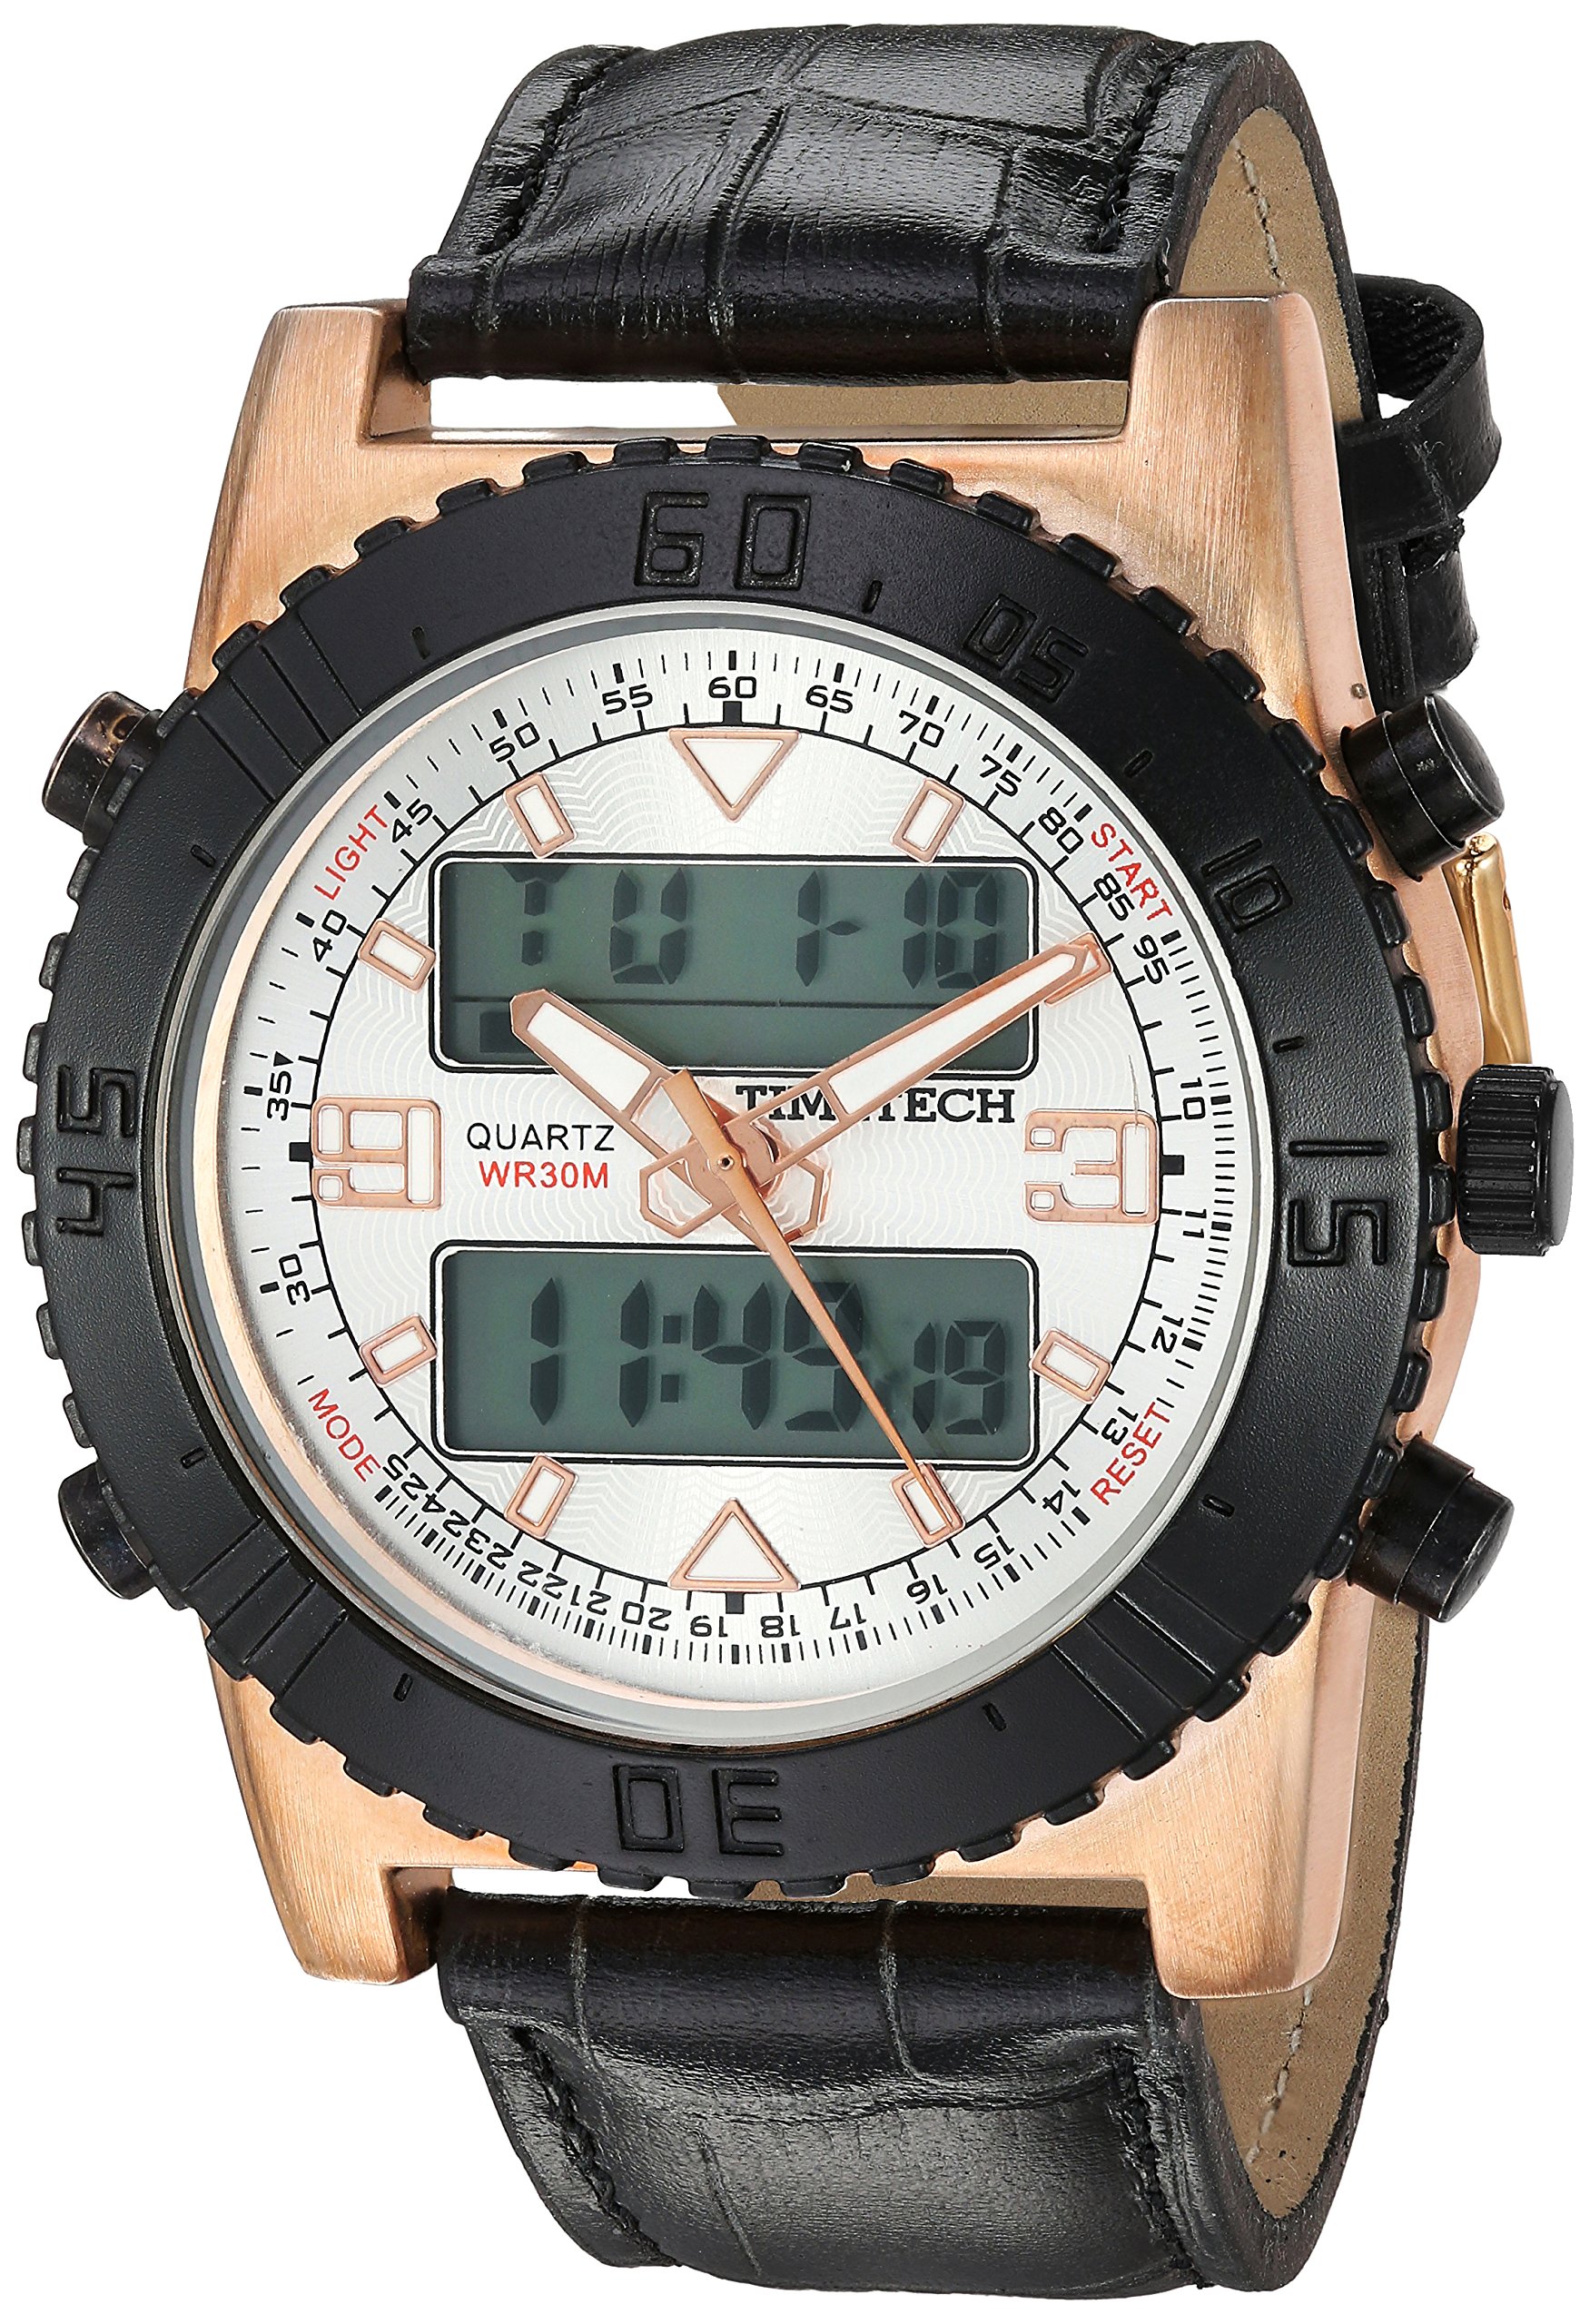 TIMETECH Men's Analog/Digital Multi-Function Weekend Sport Watch with Leather Wrist Band